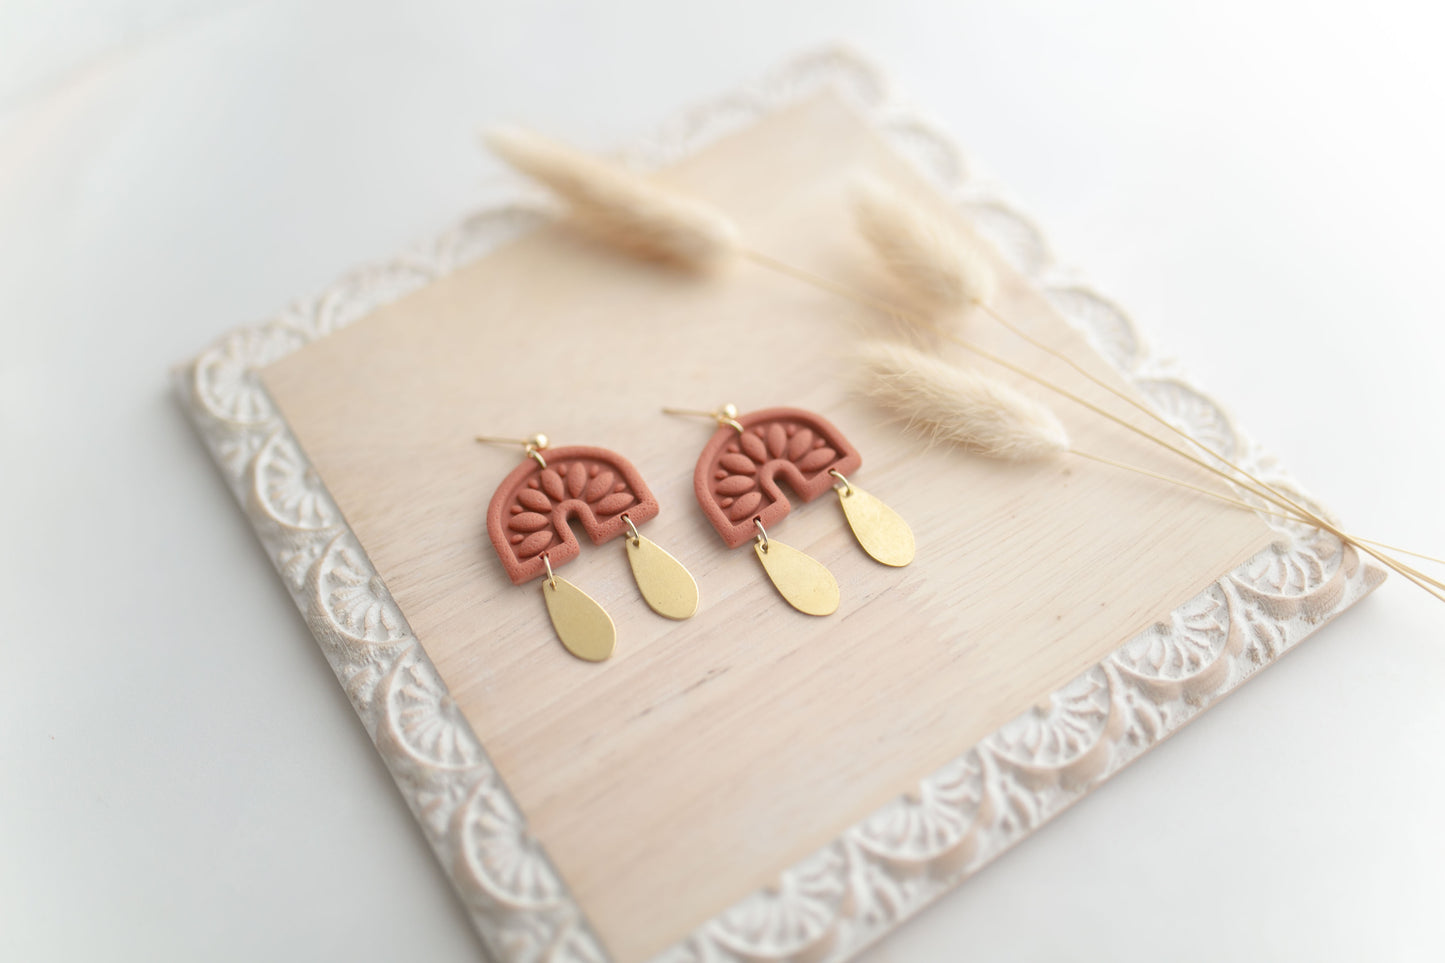 Clay earring | tera-cotta cowgirl dangles | Southwest Collection